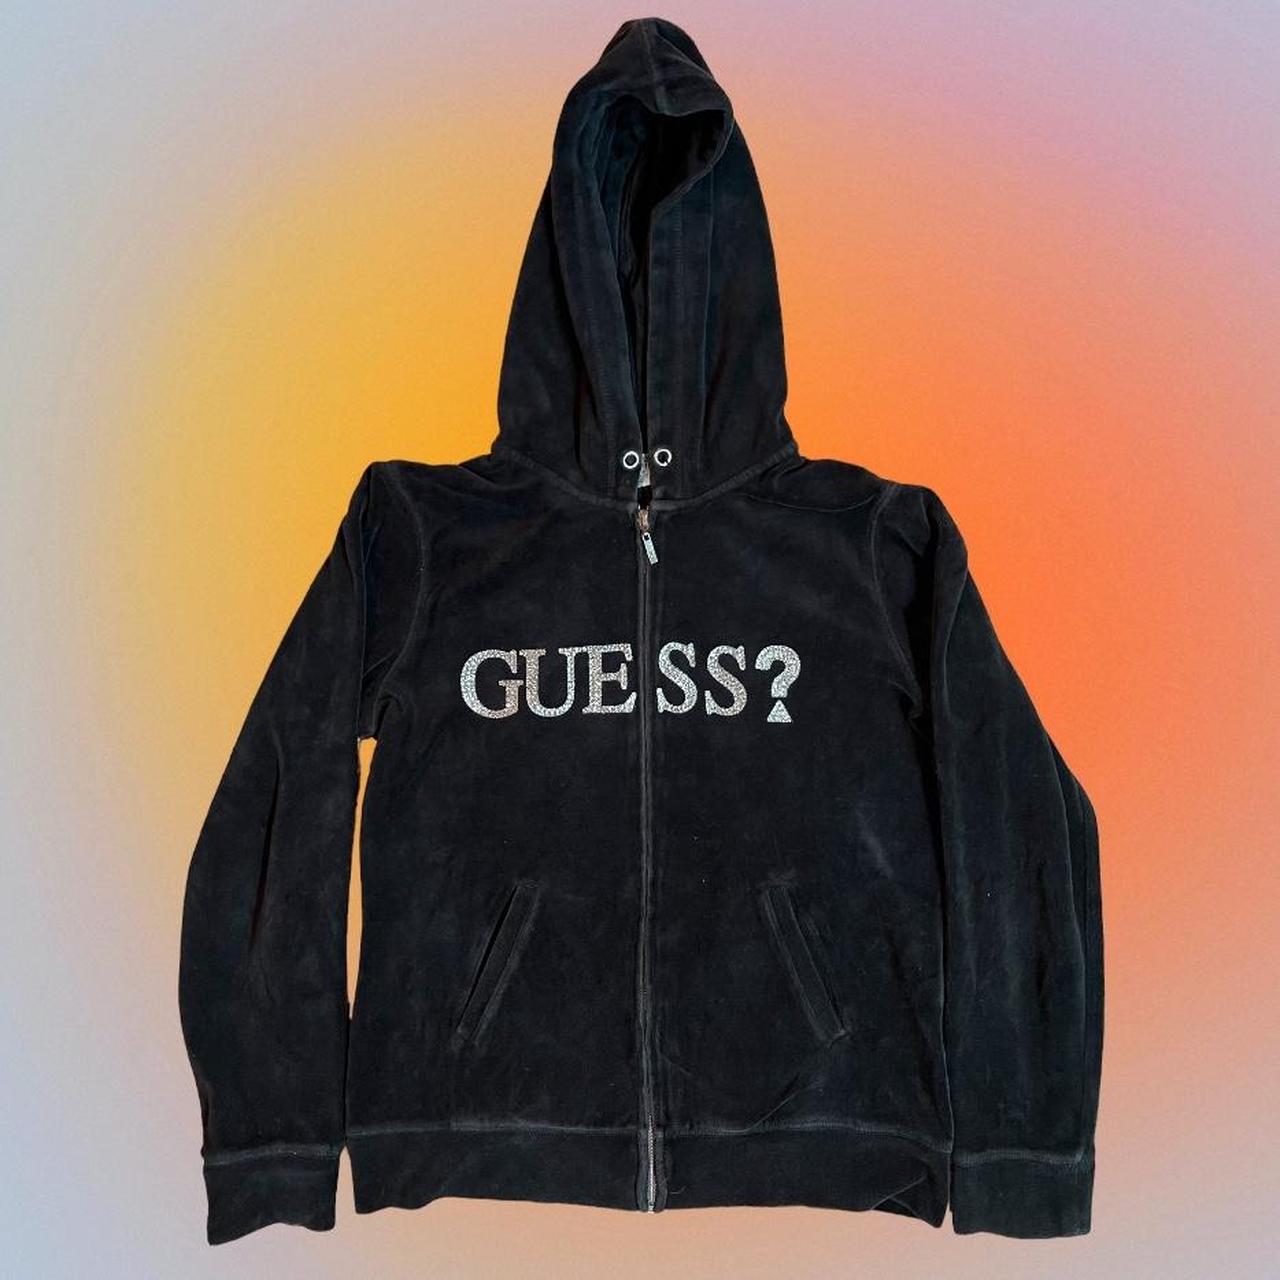 Guess Women's Black and Silver Hoodie